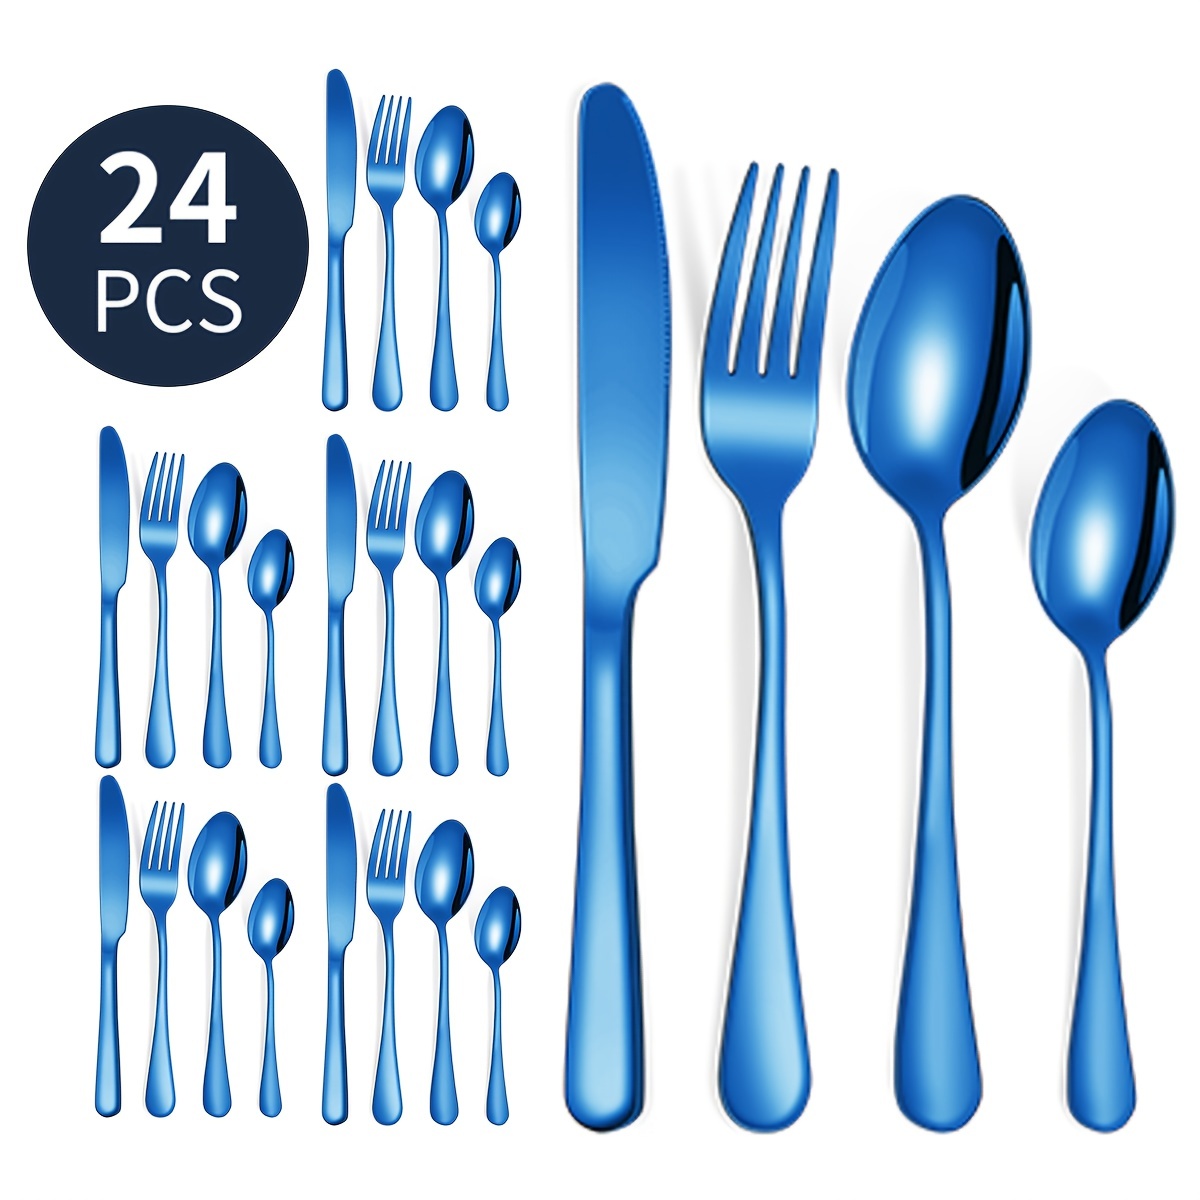 LIANYU 30 Piece Silverware Set for 6, Stainless Steel Flatware Cutlery Set,  Tableware Eating Utensils Include Forks Knives Spoons, Mirror Finish